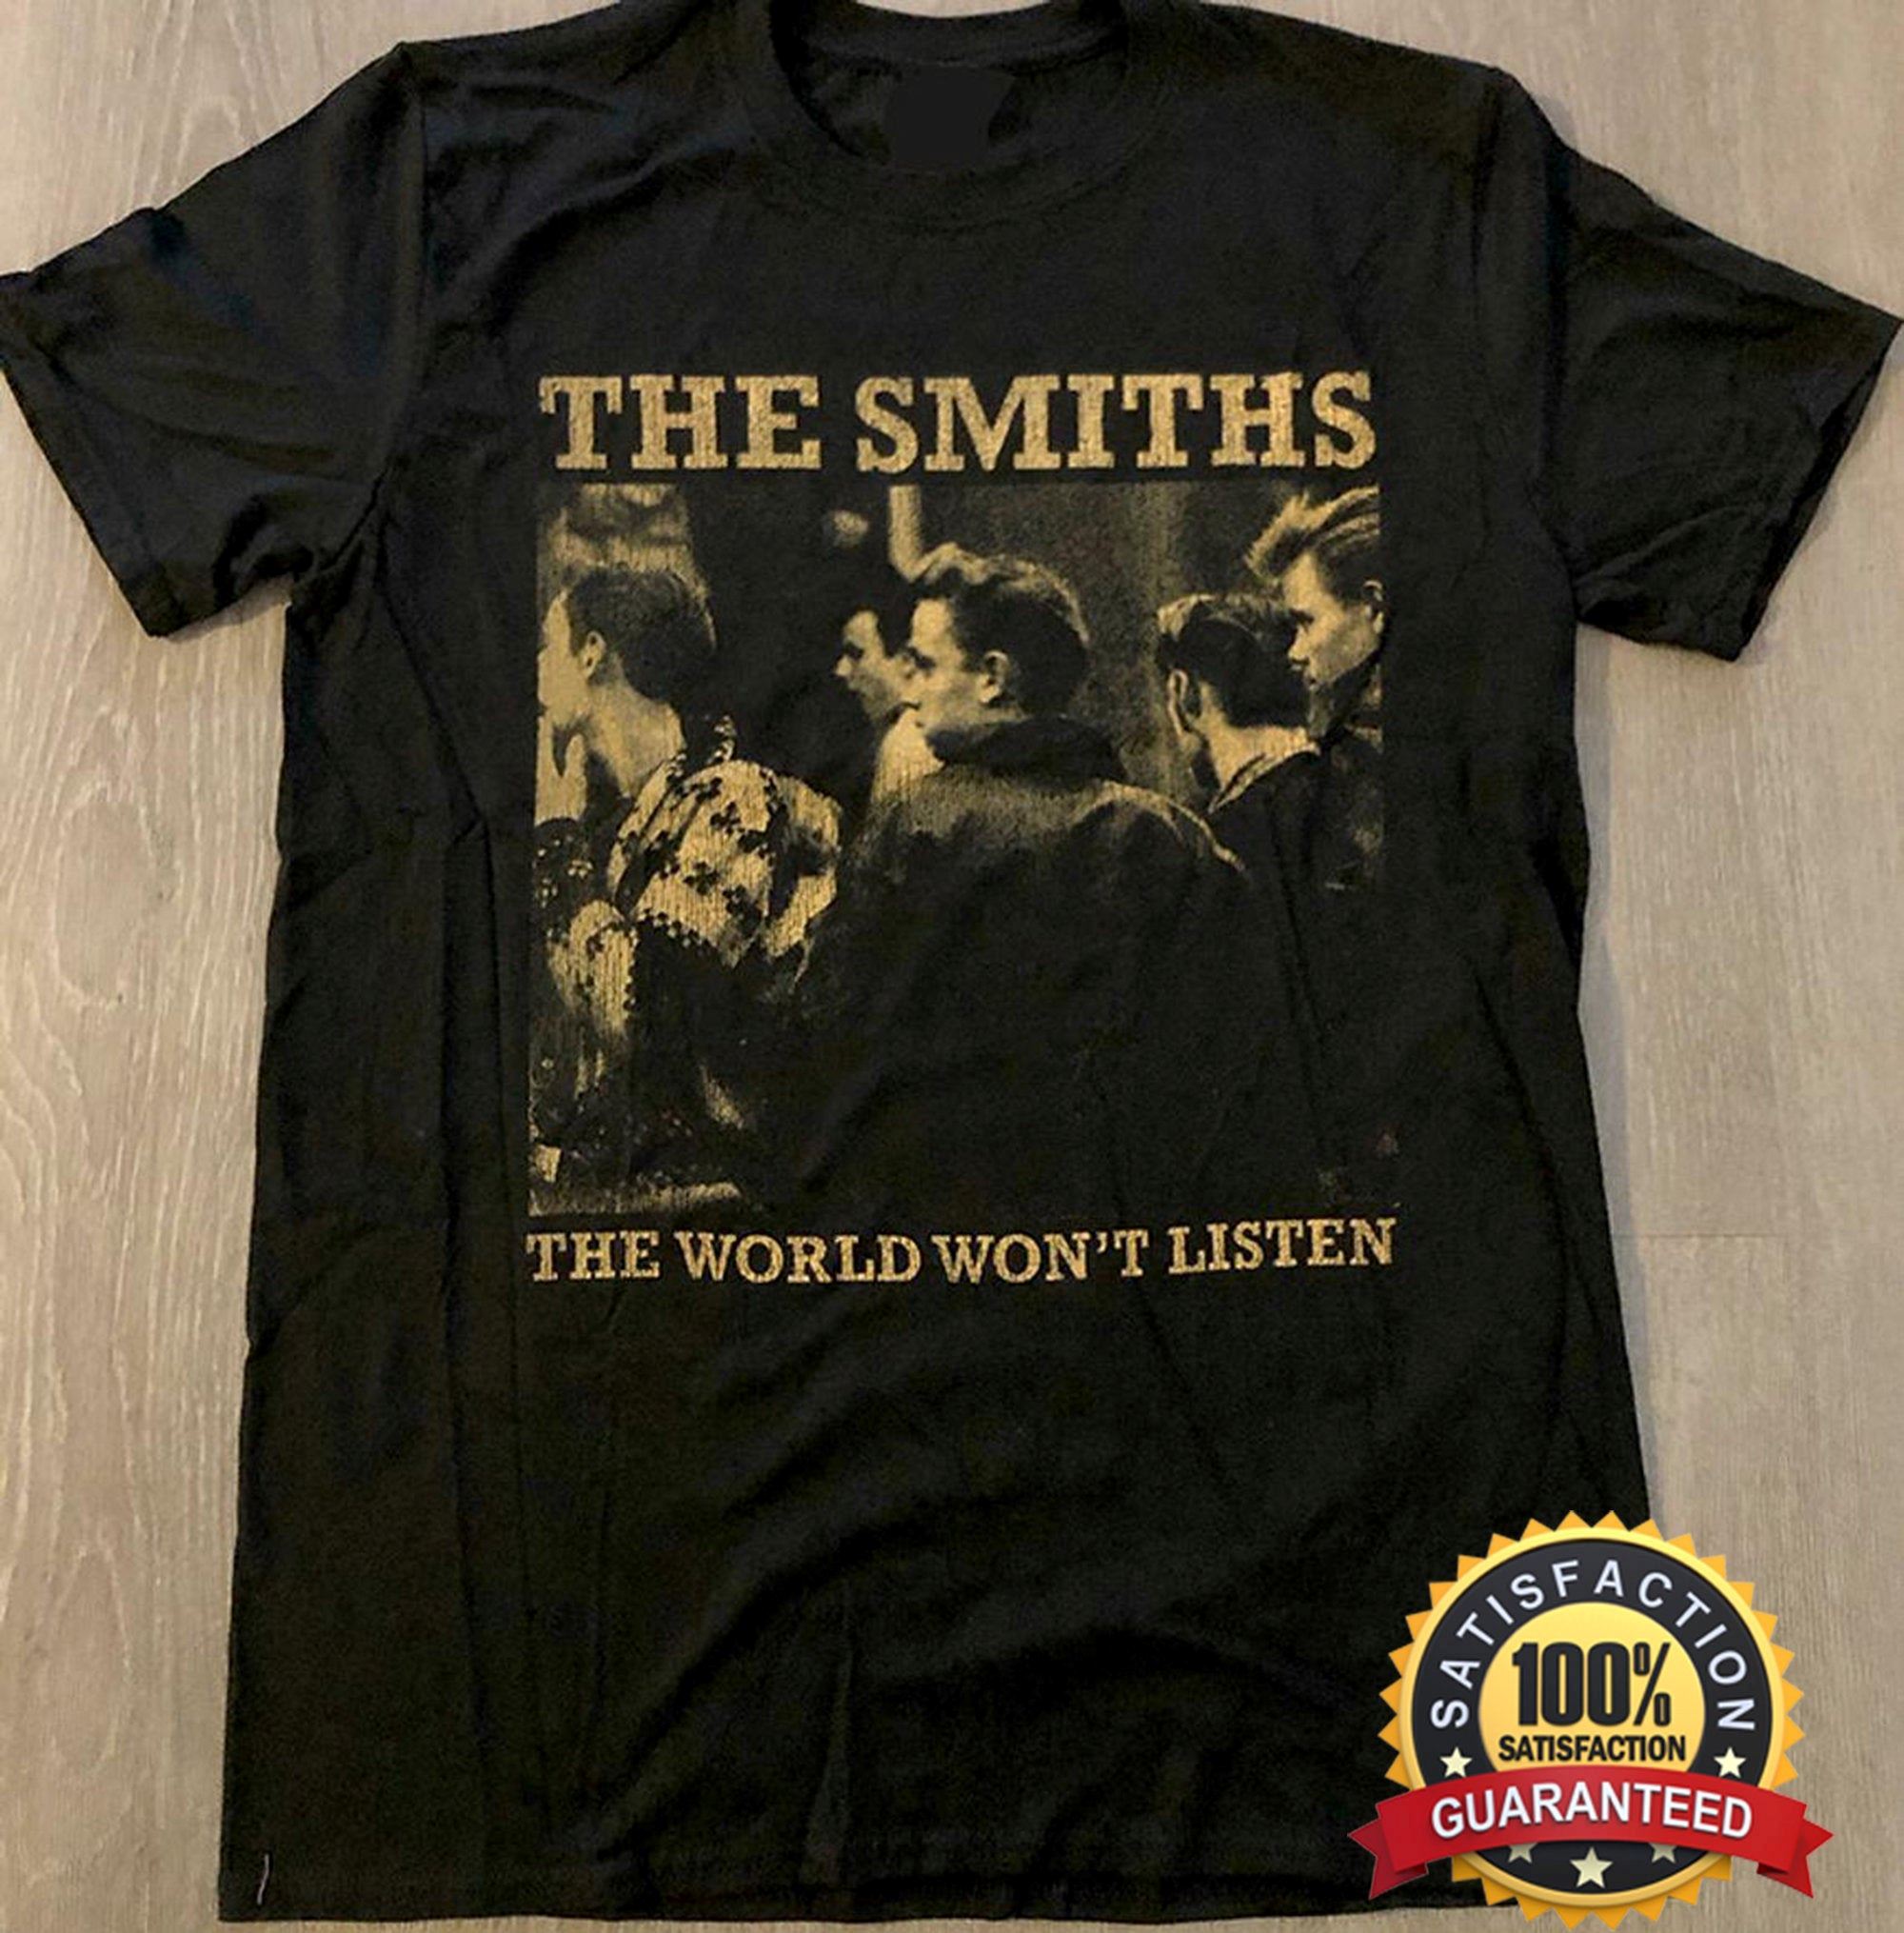 Promotions The Smiths Shirt The Smiths Tee The Smiths Merch The Smiths The World Won't Listen T Shirt Ab470 